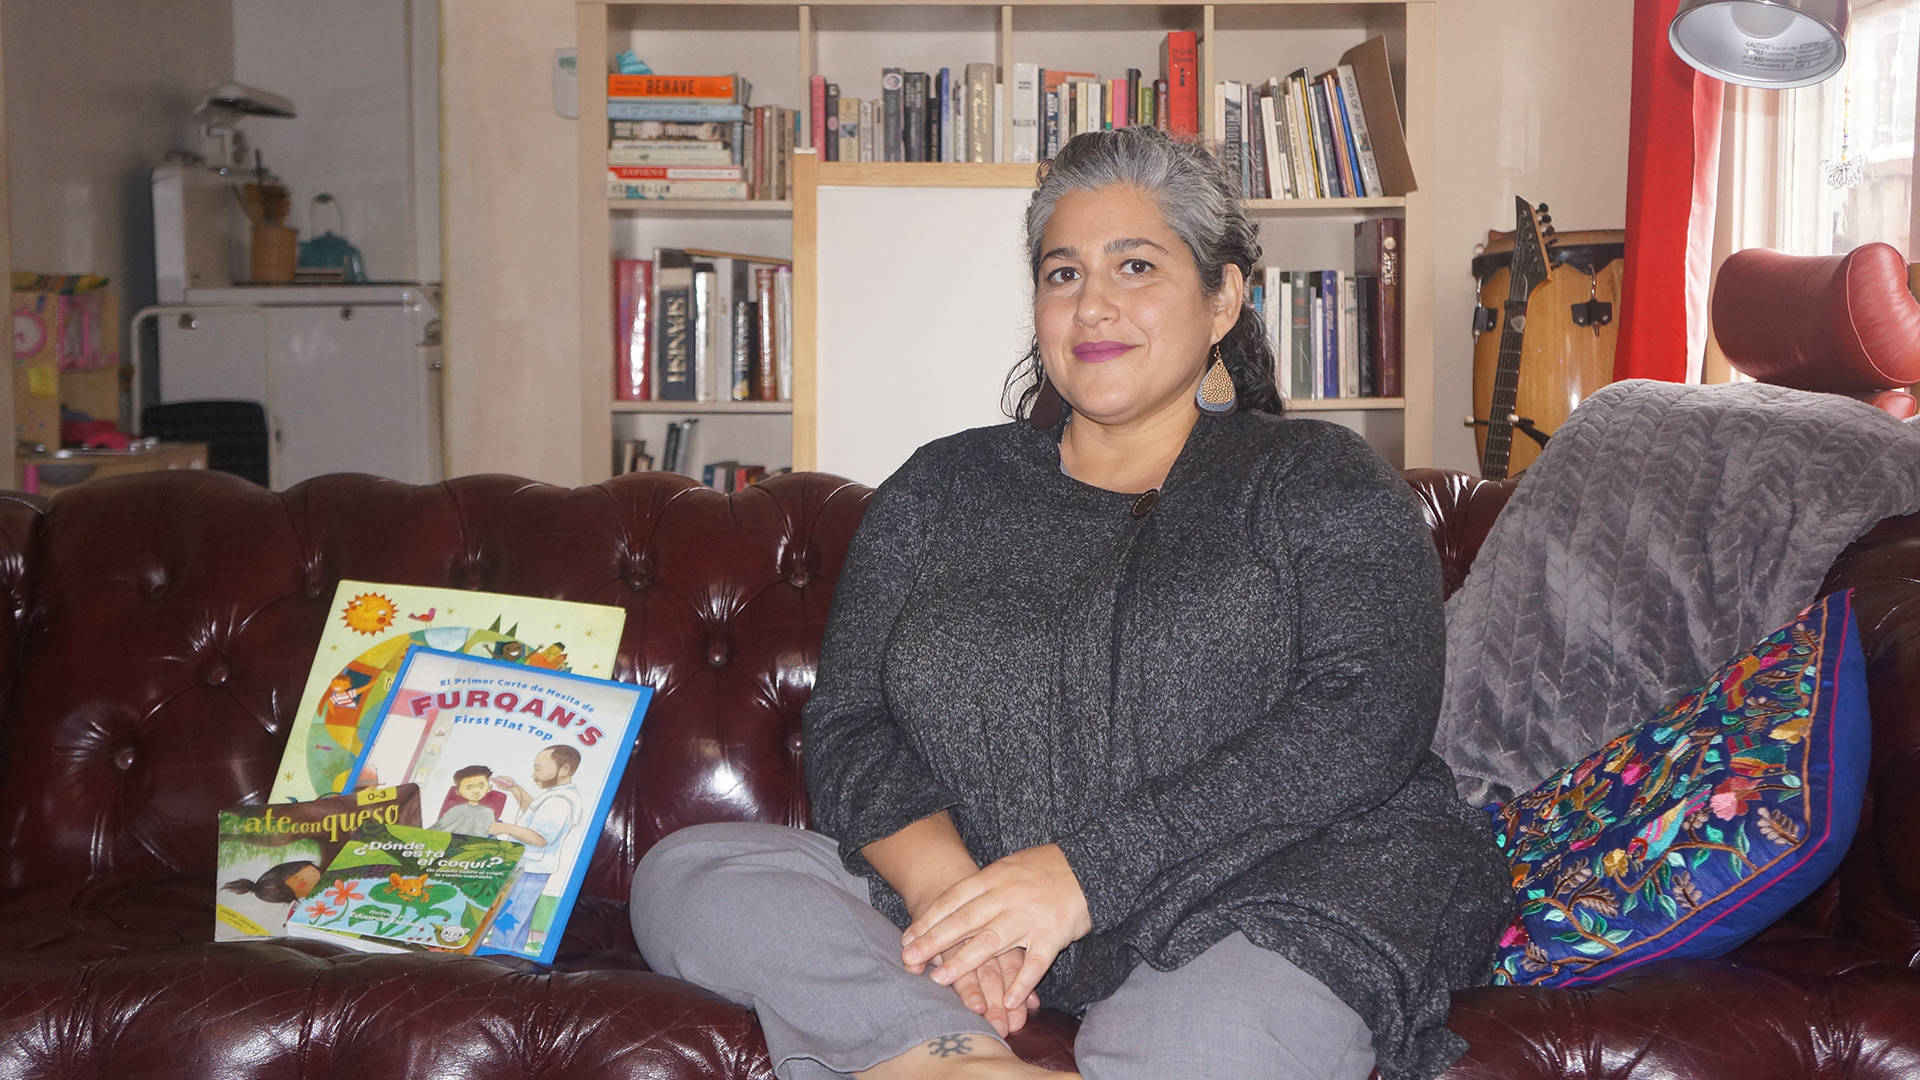 Oakland's Maceo Cabrera Estevez founded the subscription service Booklandia with the intention of helping bilingual families find high-quality, Spanish-language children's books. Azucena Rasilla 